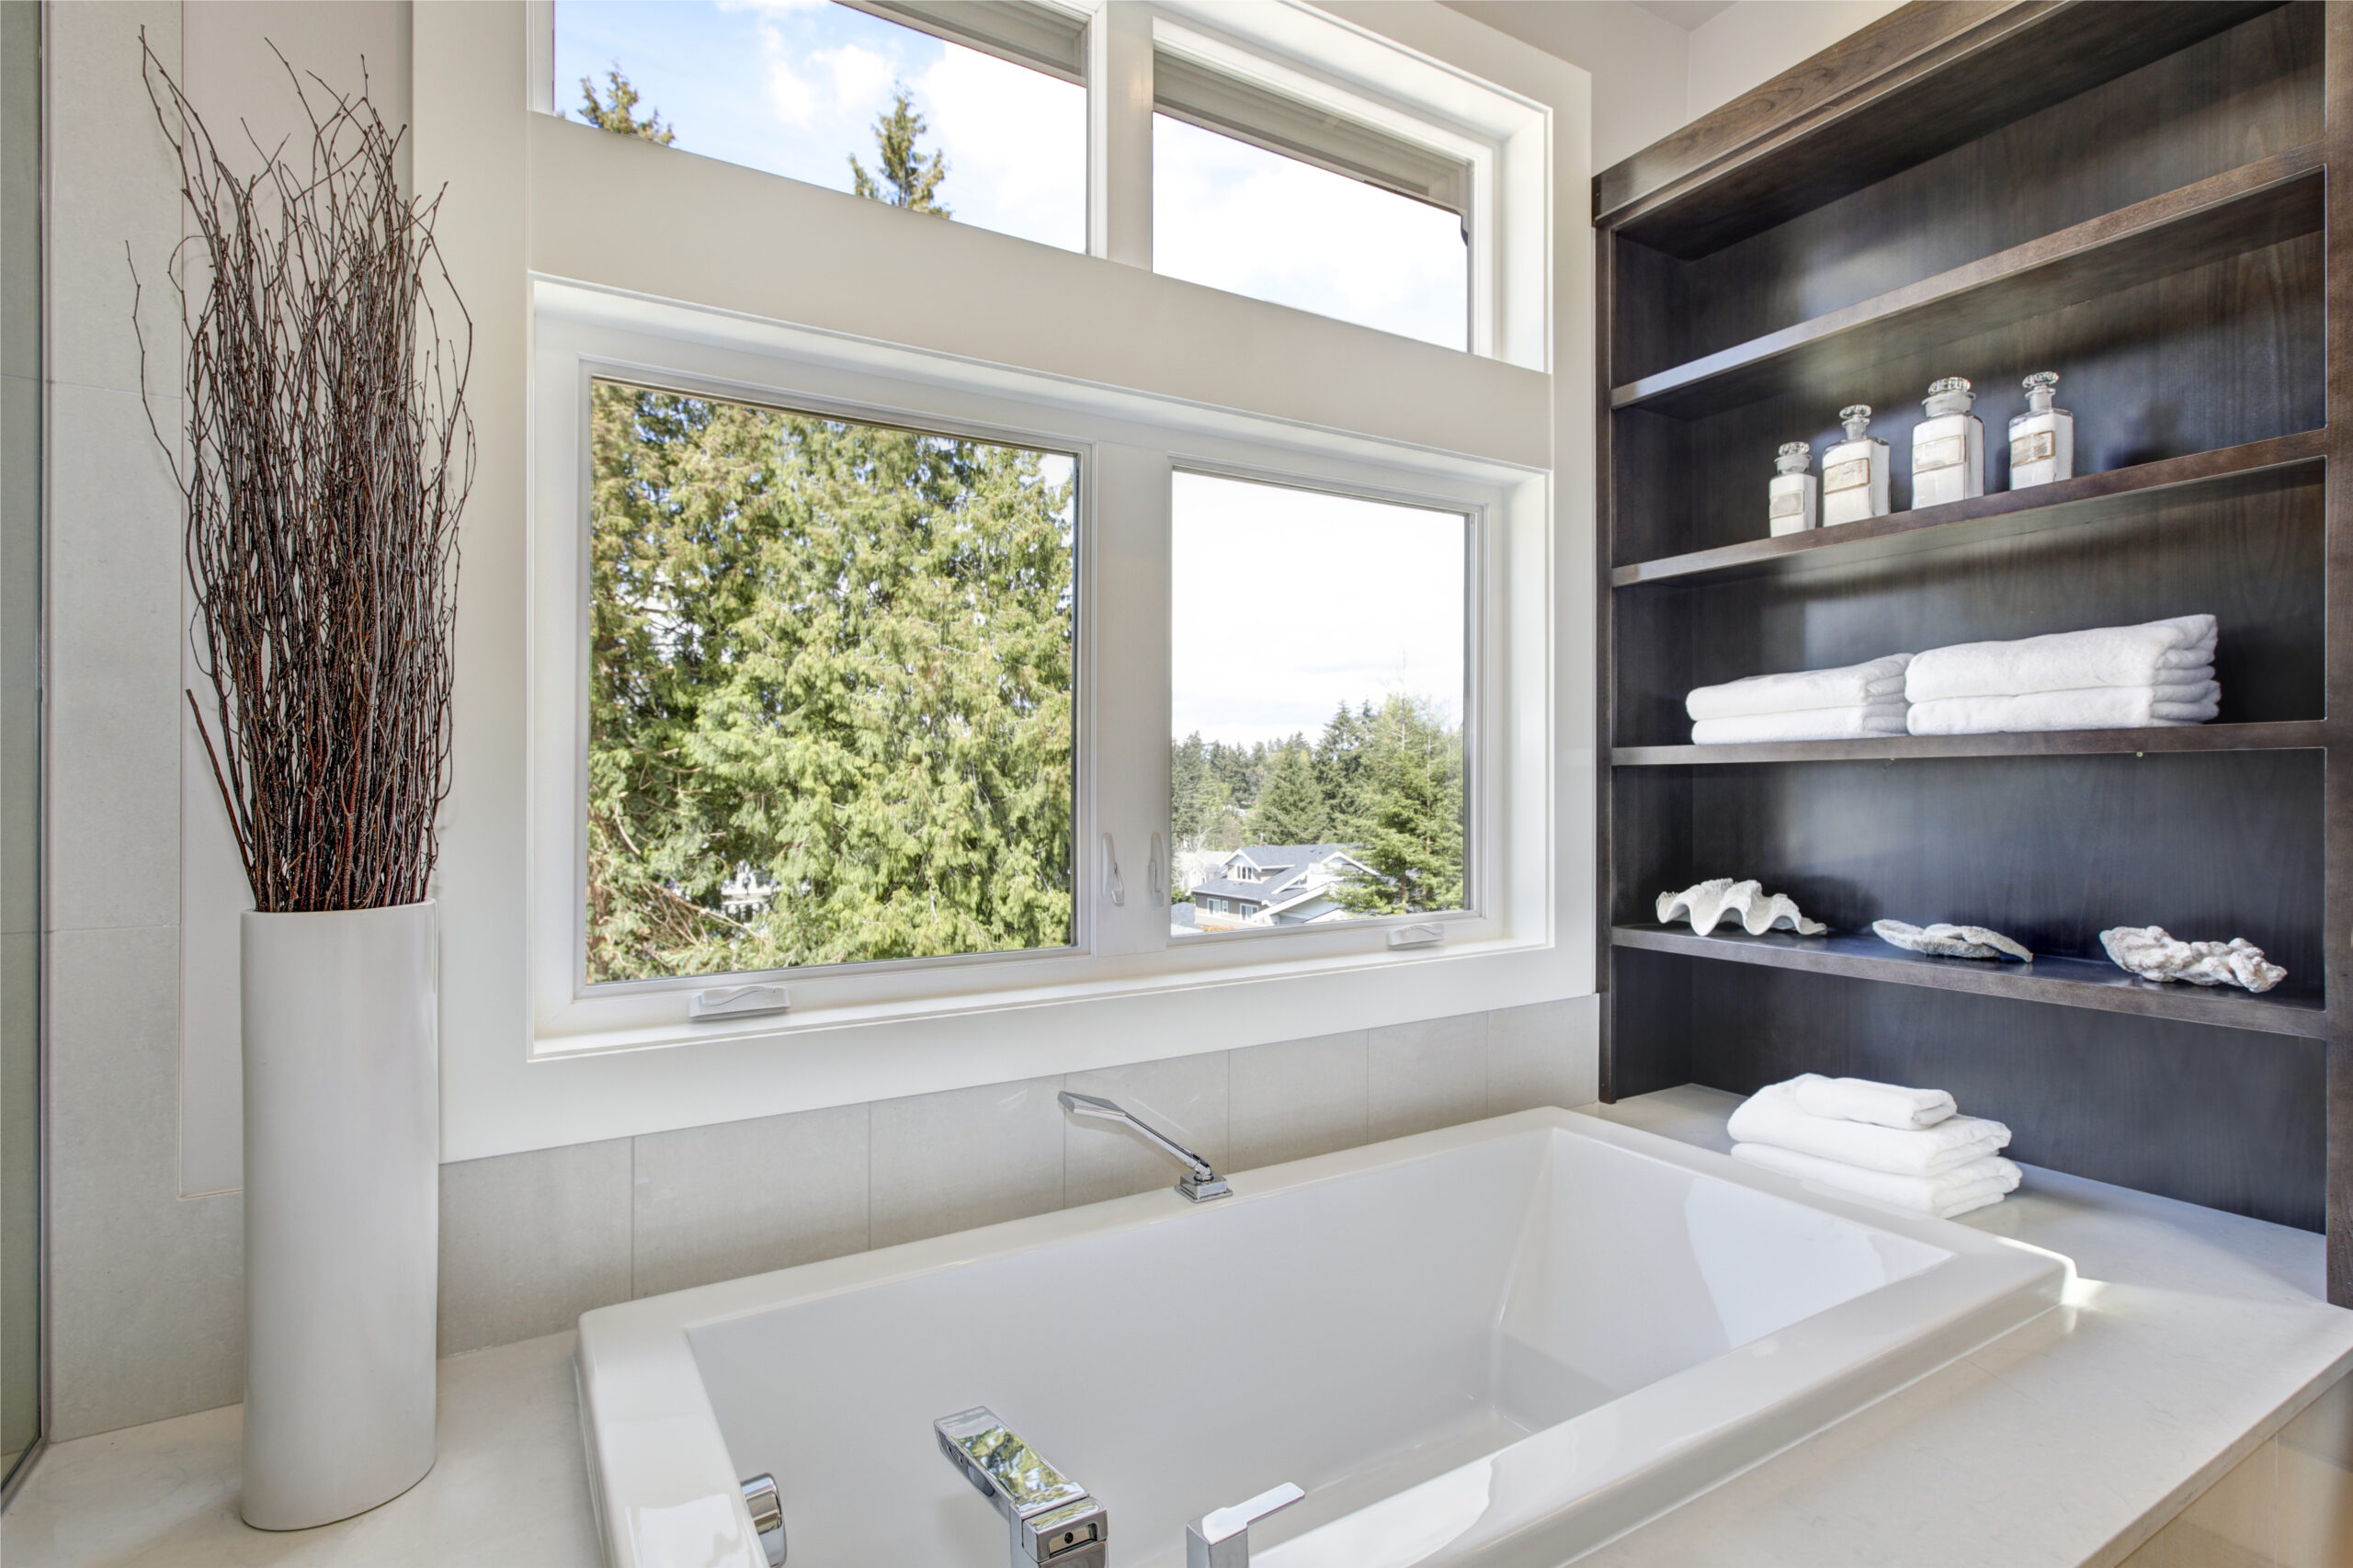 A sliding bathroom window with a view..